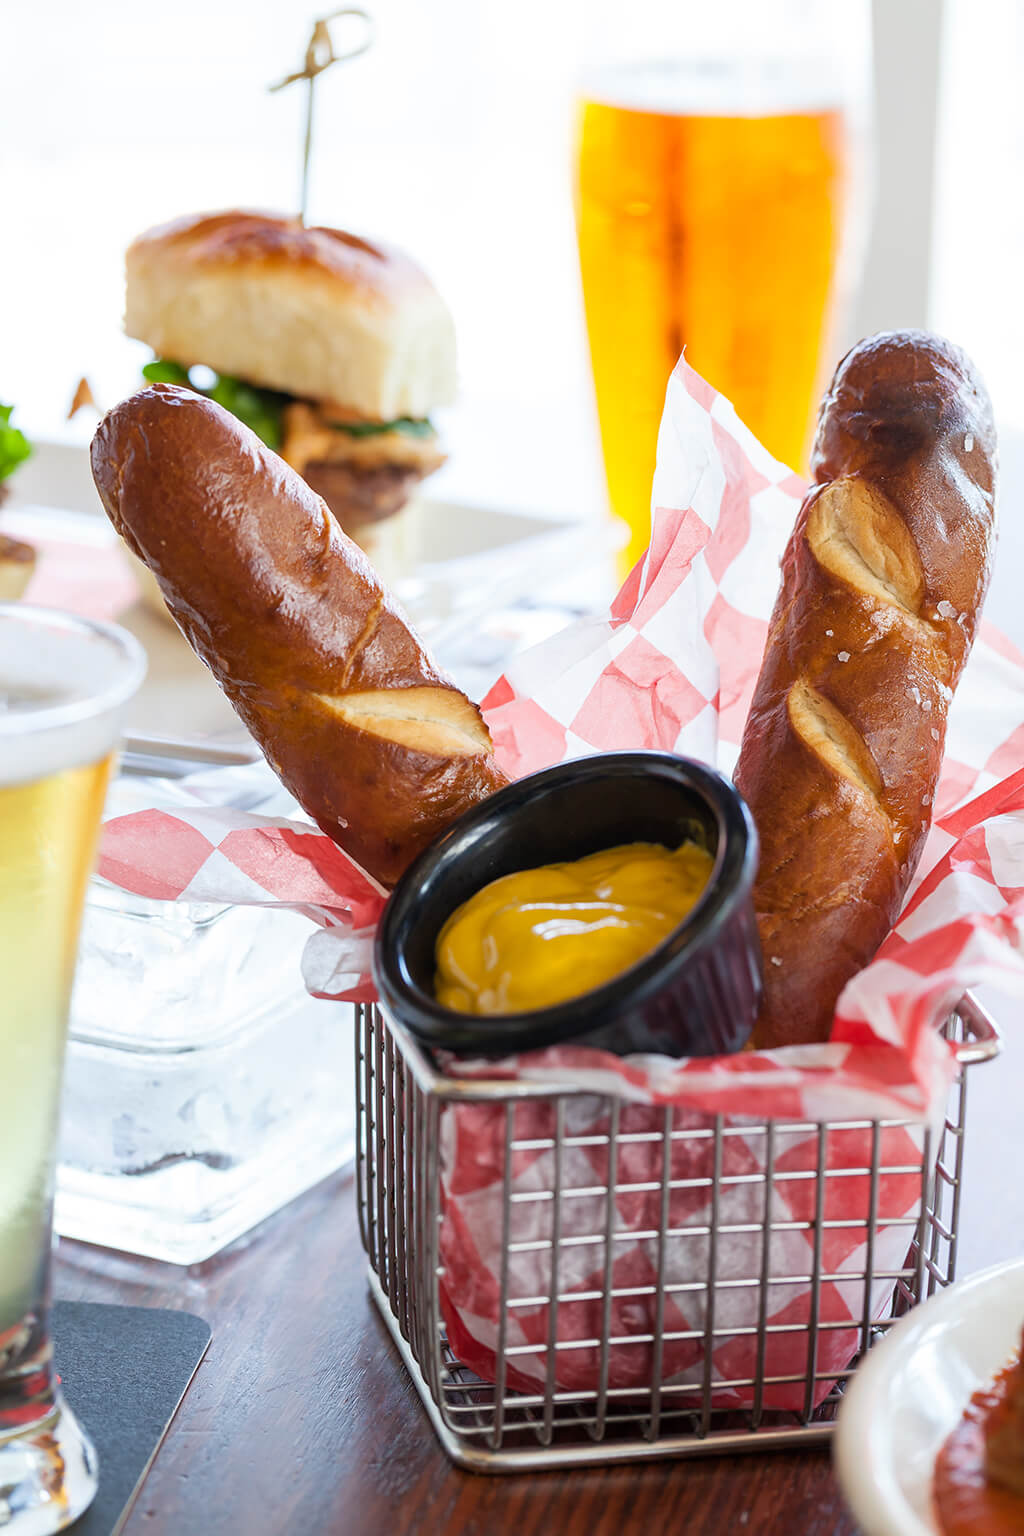 Bavarian pretzel with mustard and a beer